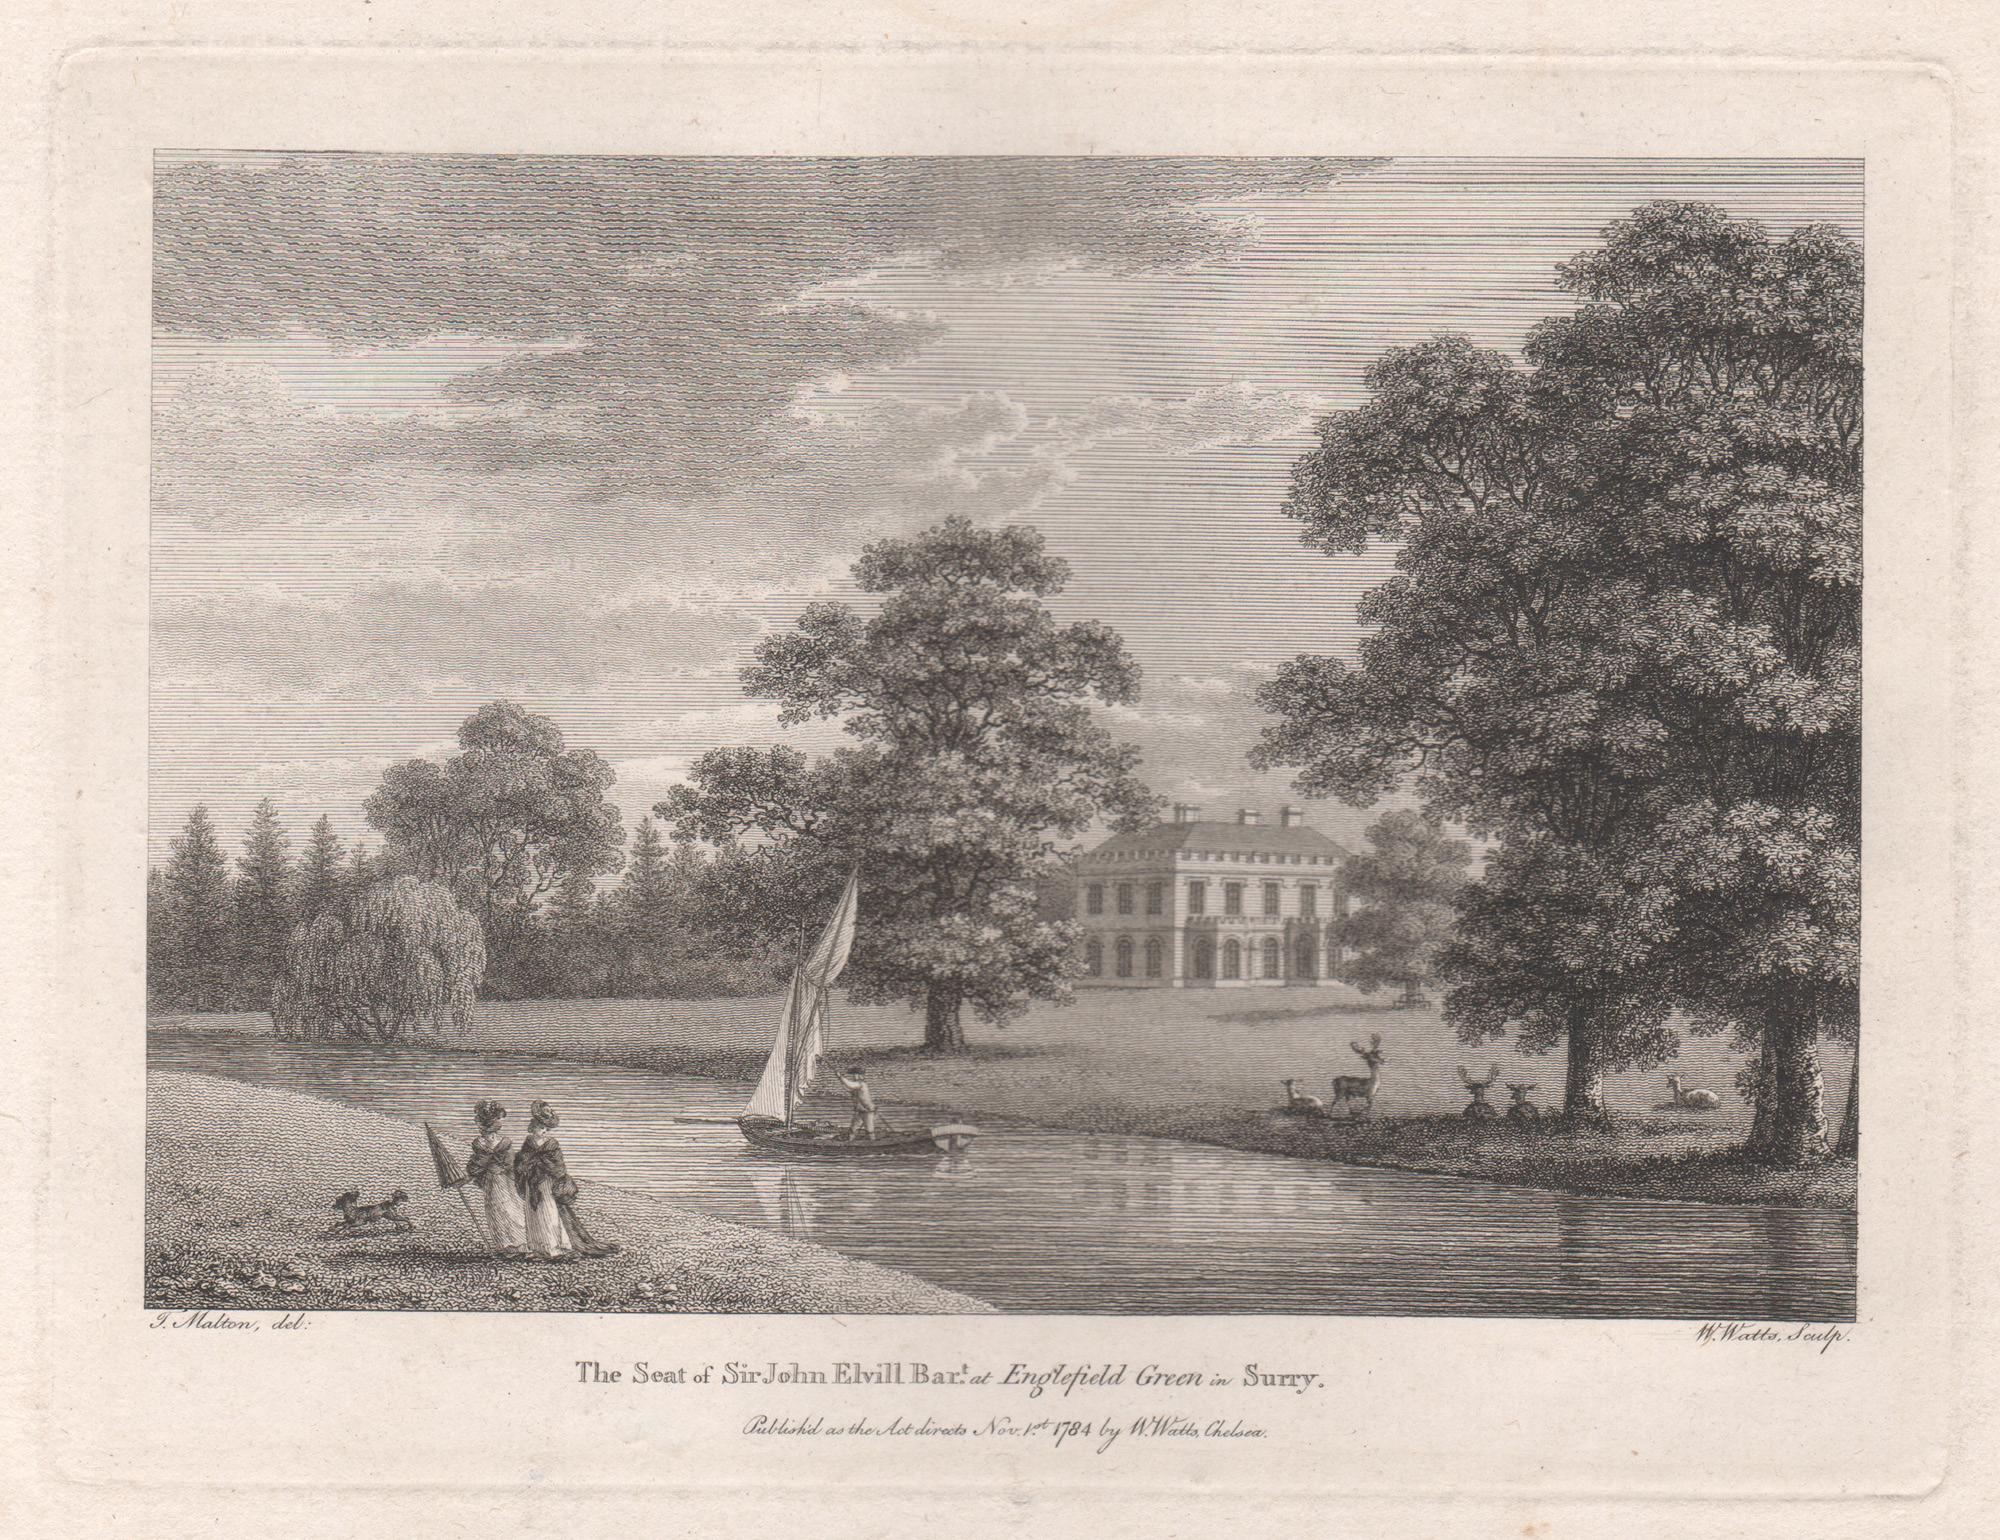 William Watts Landscape Print - Englefield Green, Surrey, 18th century English country house engraving, 1784